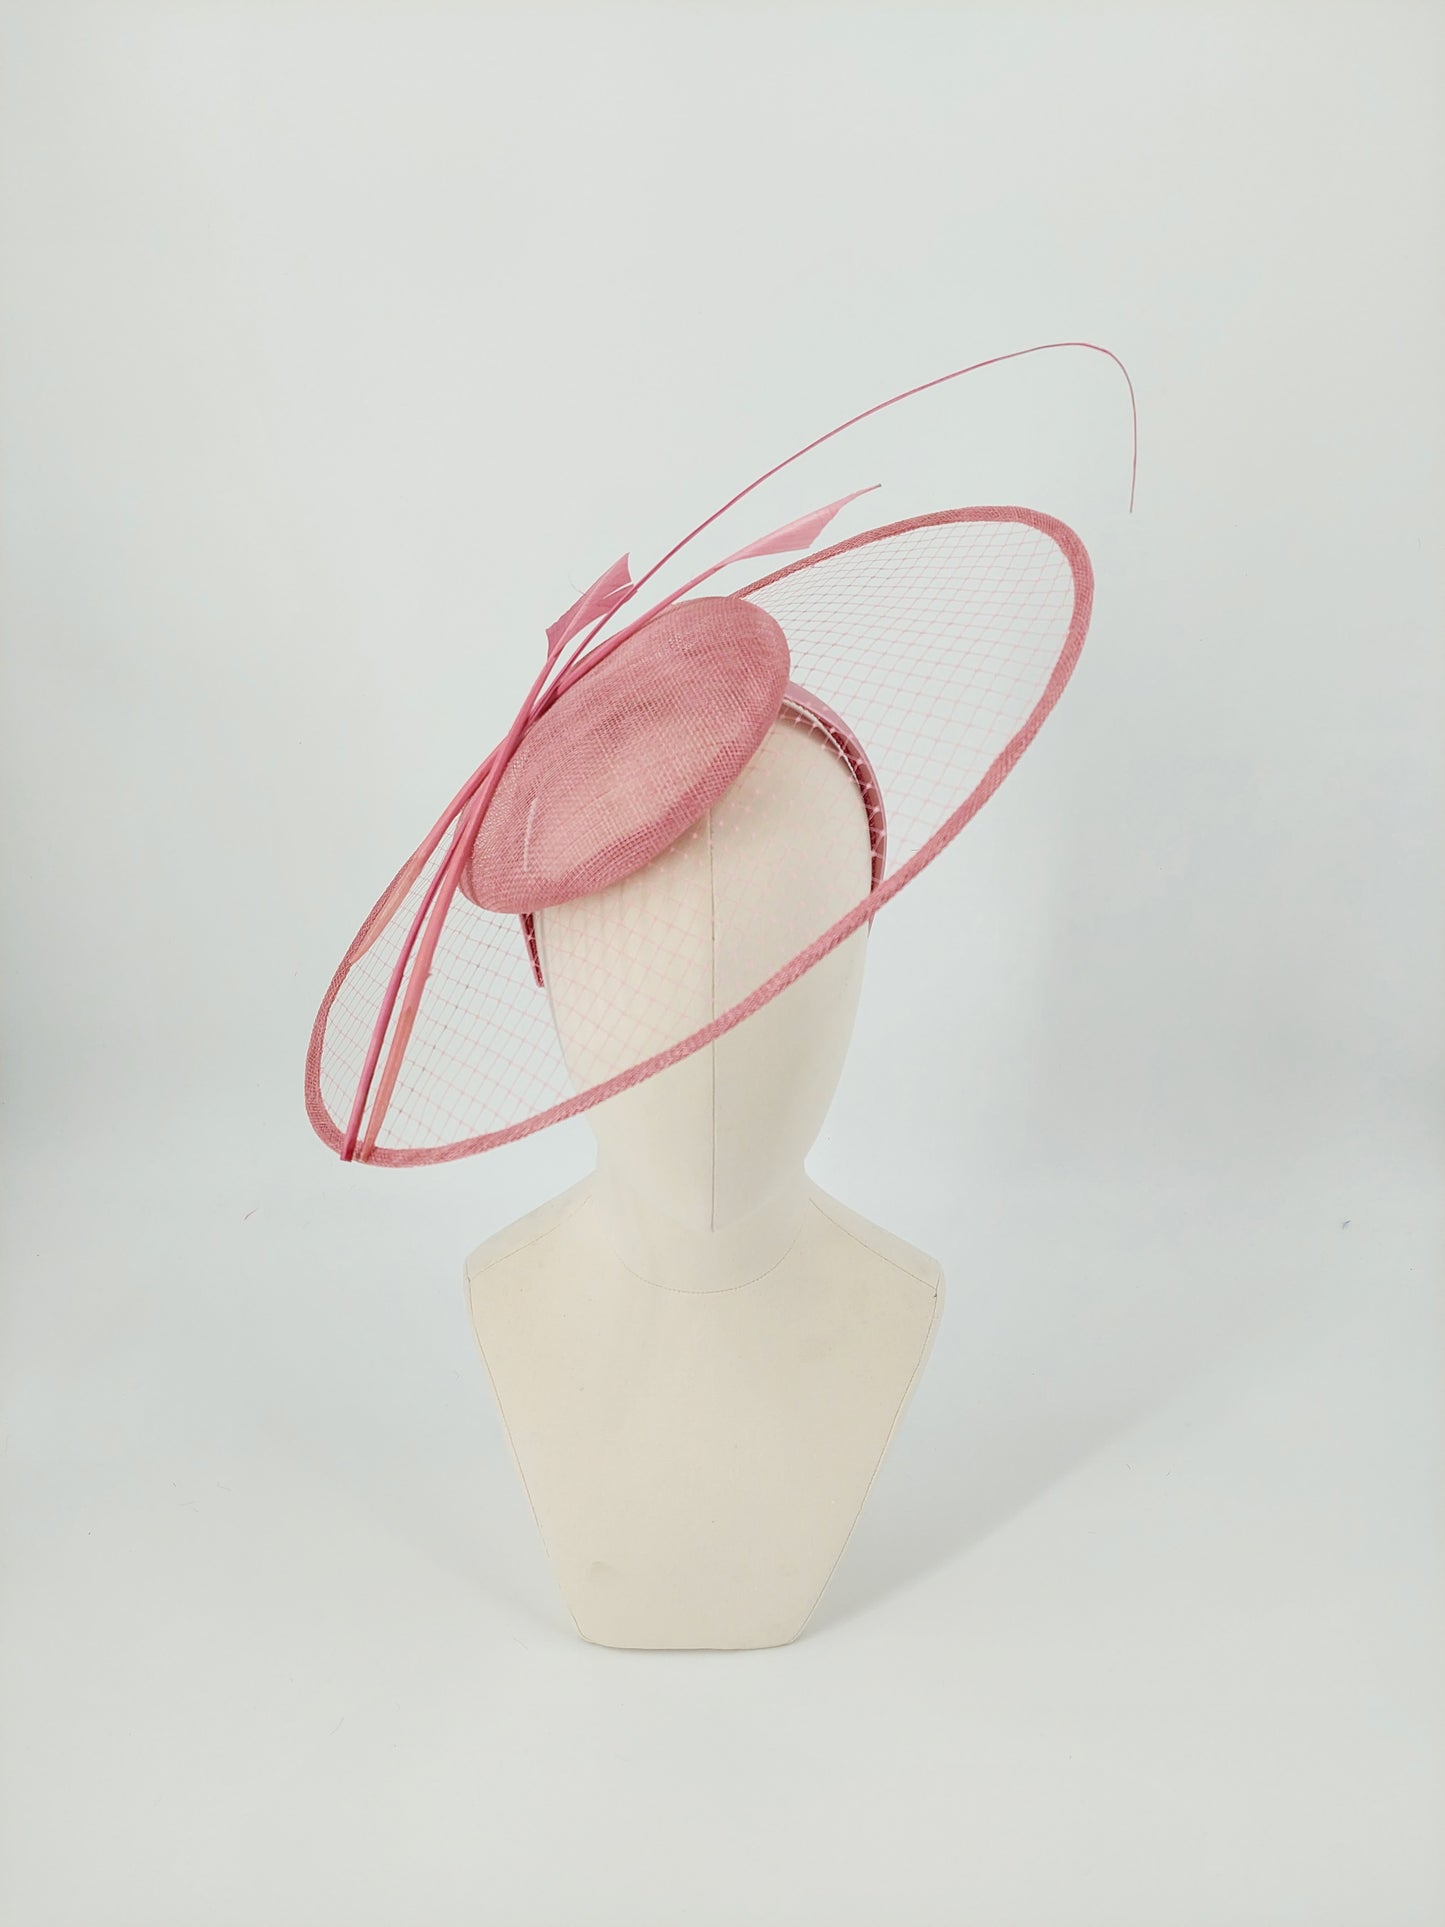 Hat Haven Millinery - custom Kentucky Derby hats and fascinators. Hand made hats in Louisville, Kentucky. Milliner in Louisville. Custom hat maker.